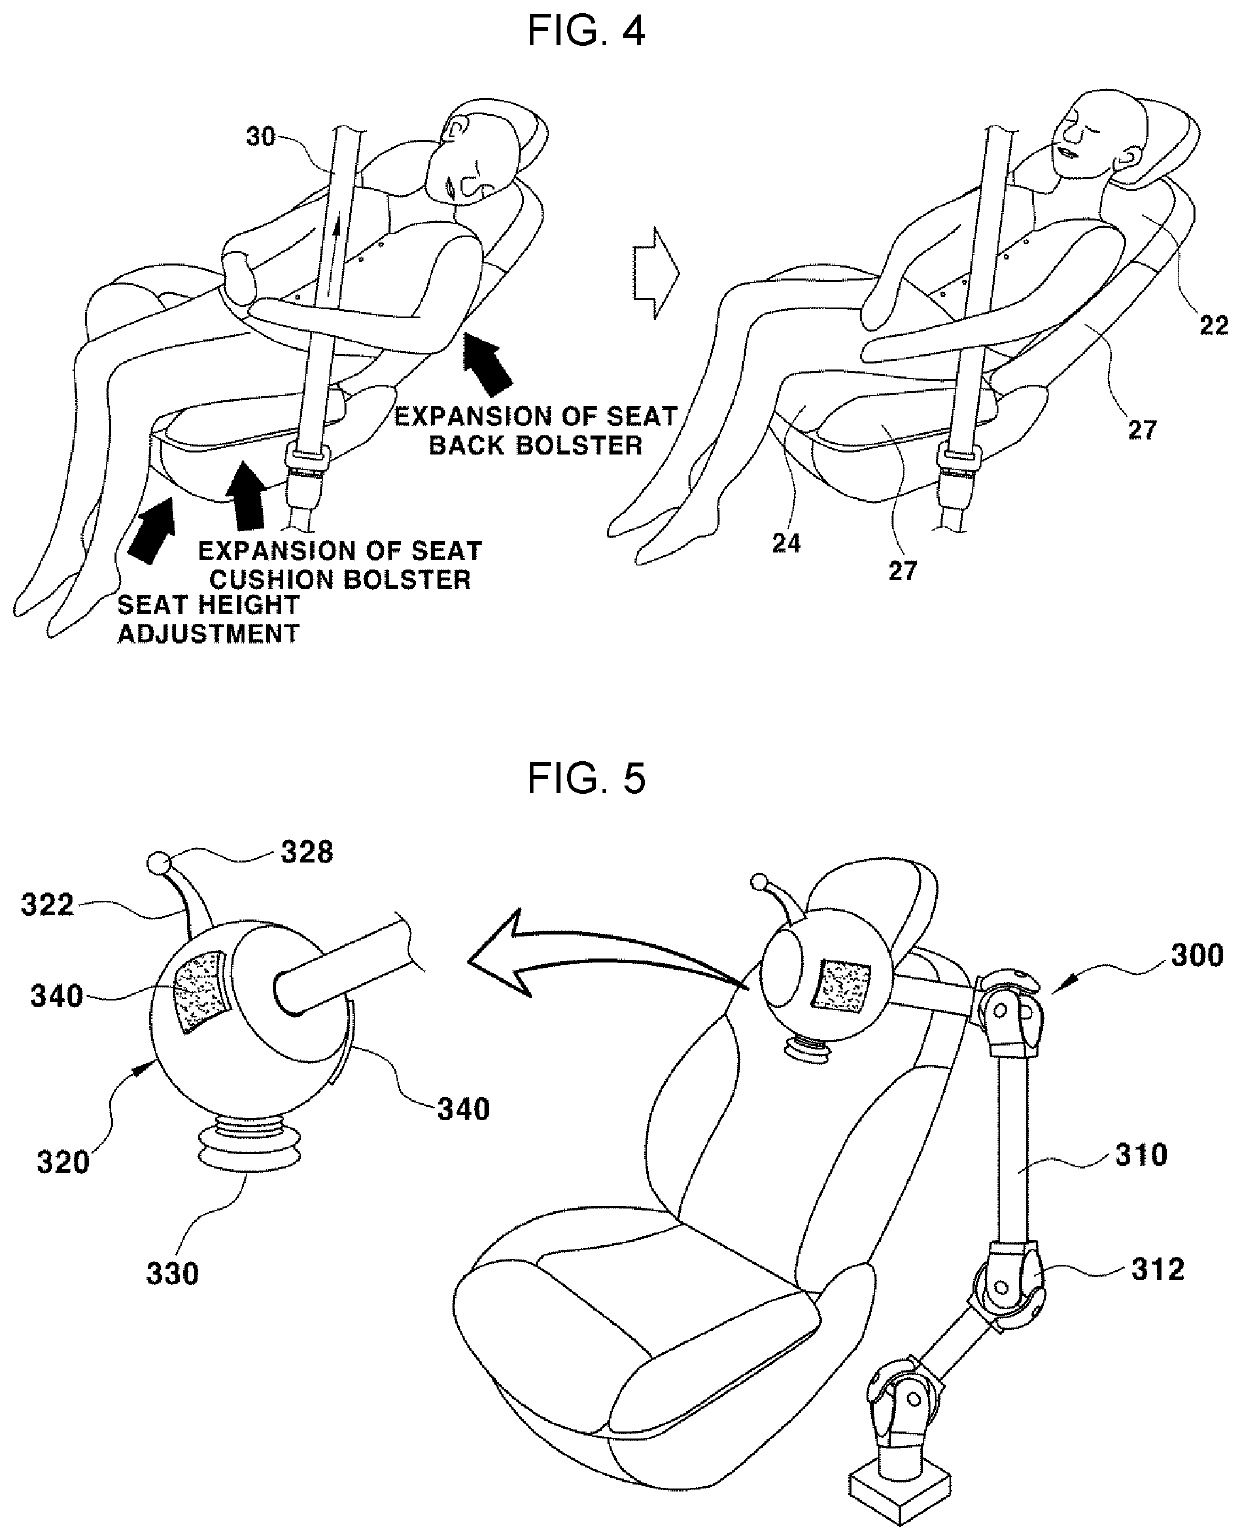 Defibrillation system for self-driving vehicles